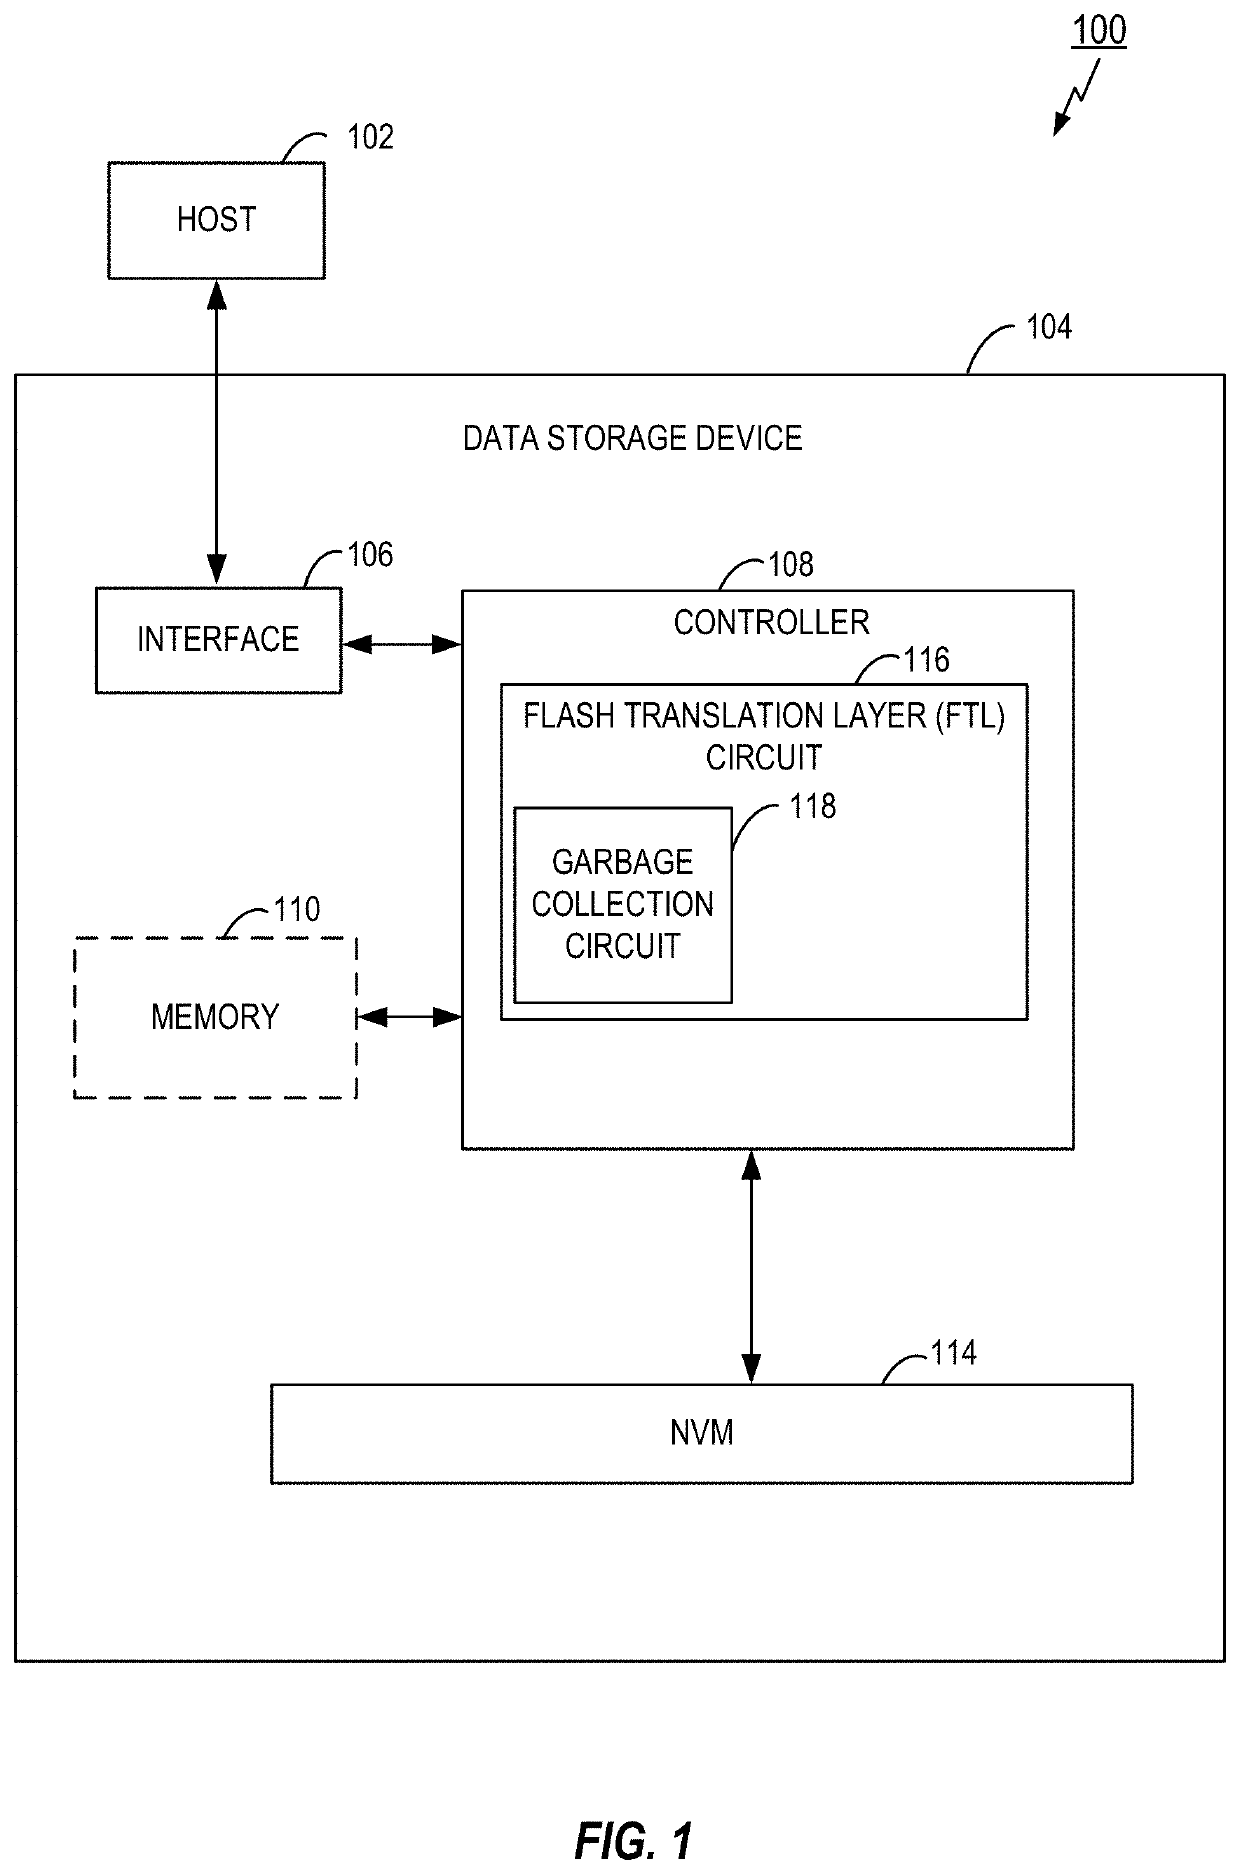 Recency based victim block selection for garbage collection in a solid state device (SSD)